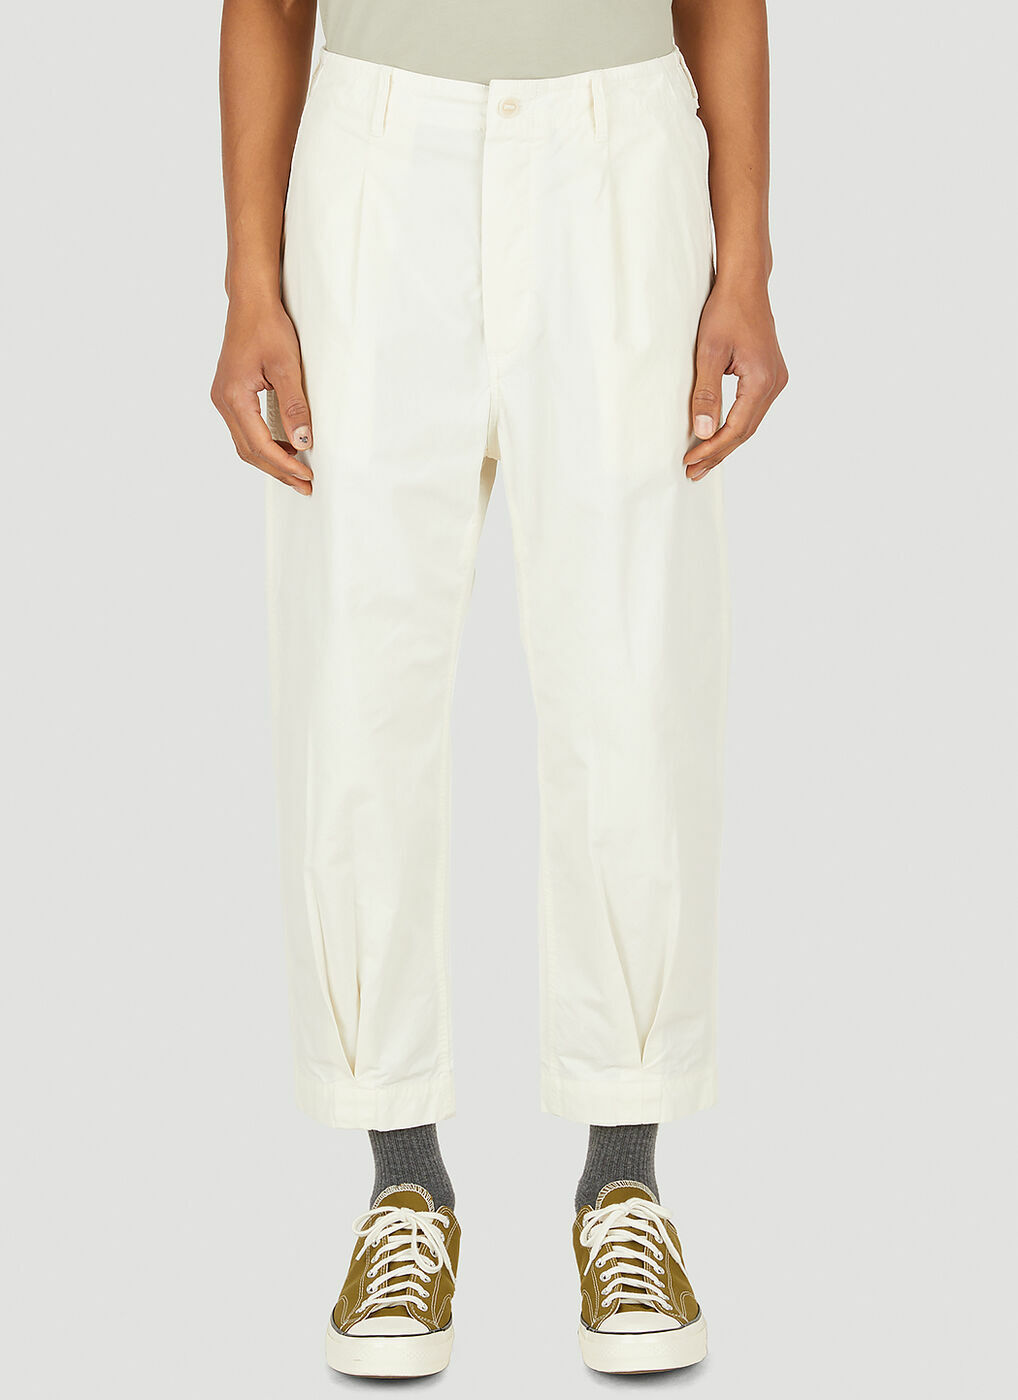 DM1-1 Japanese Cargo Pants in Cream Applied Art Forms